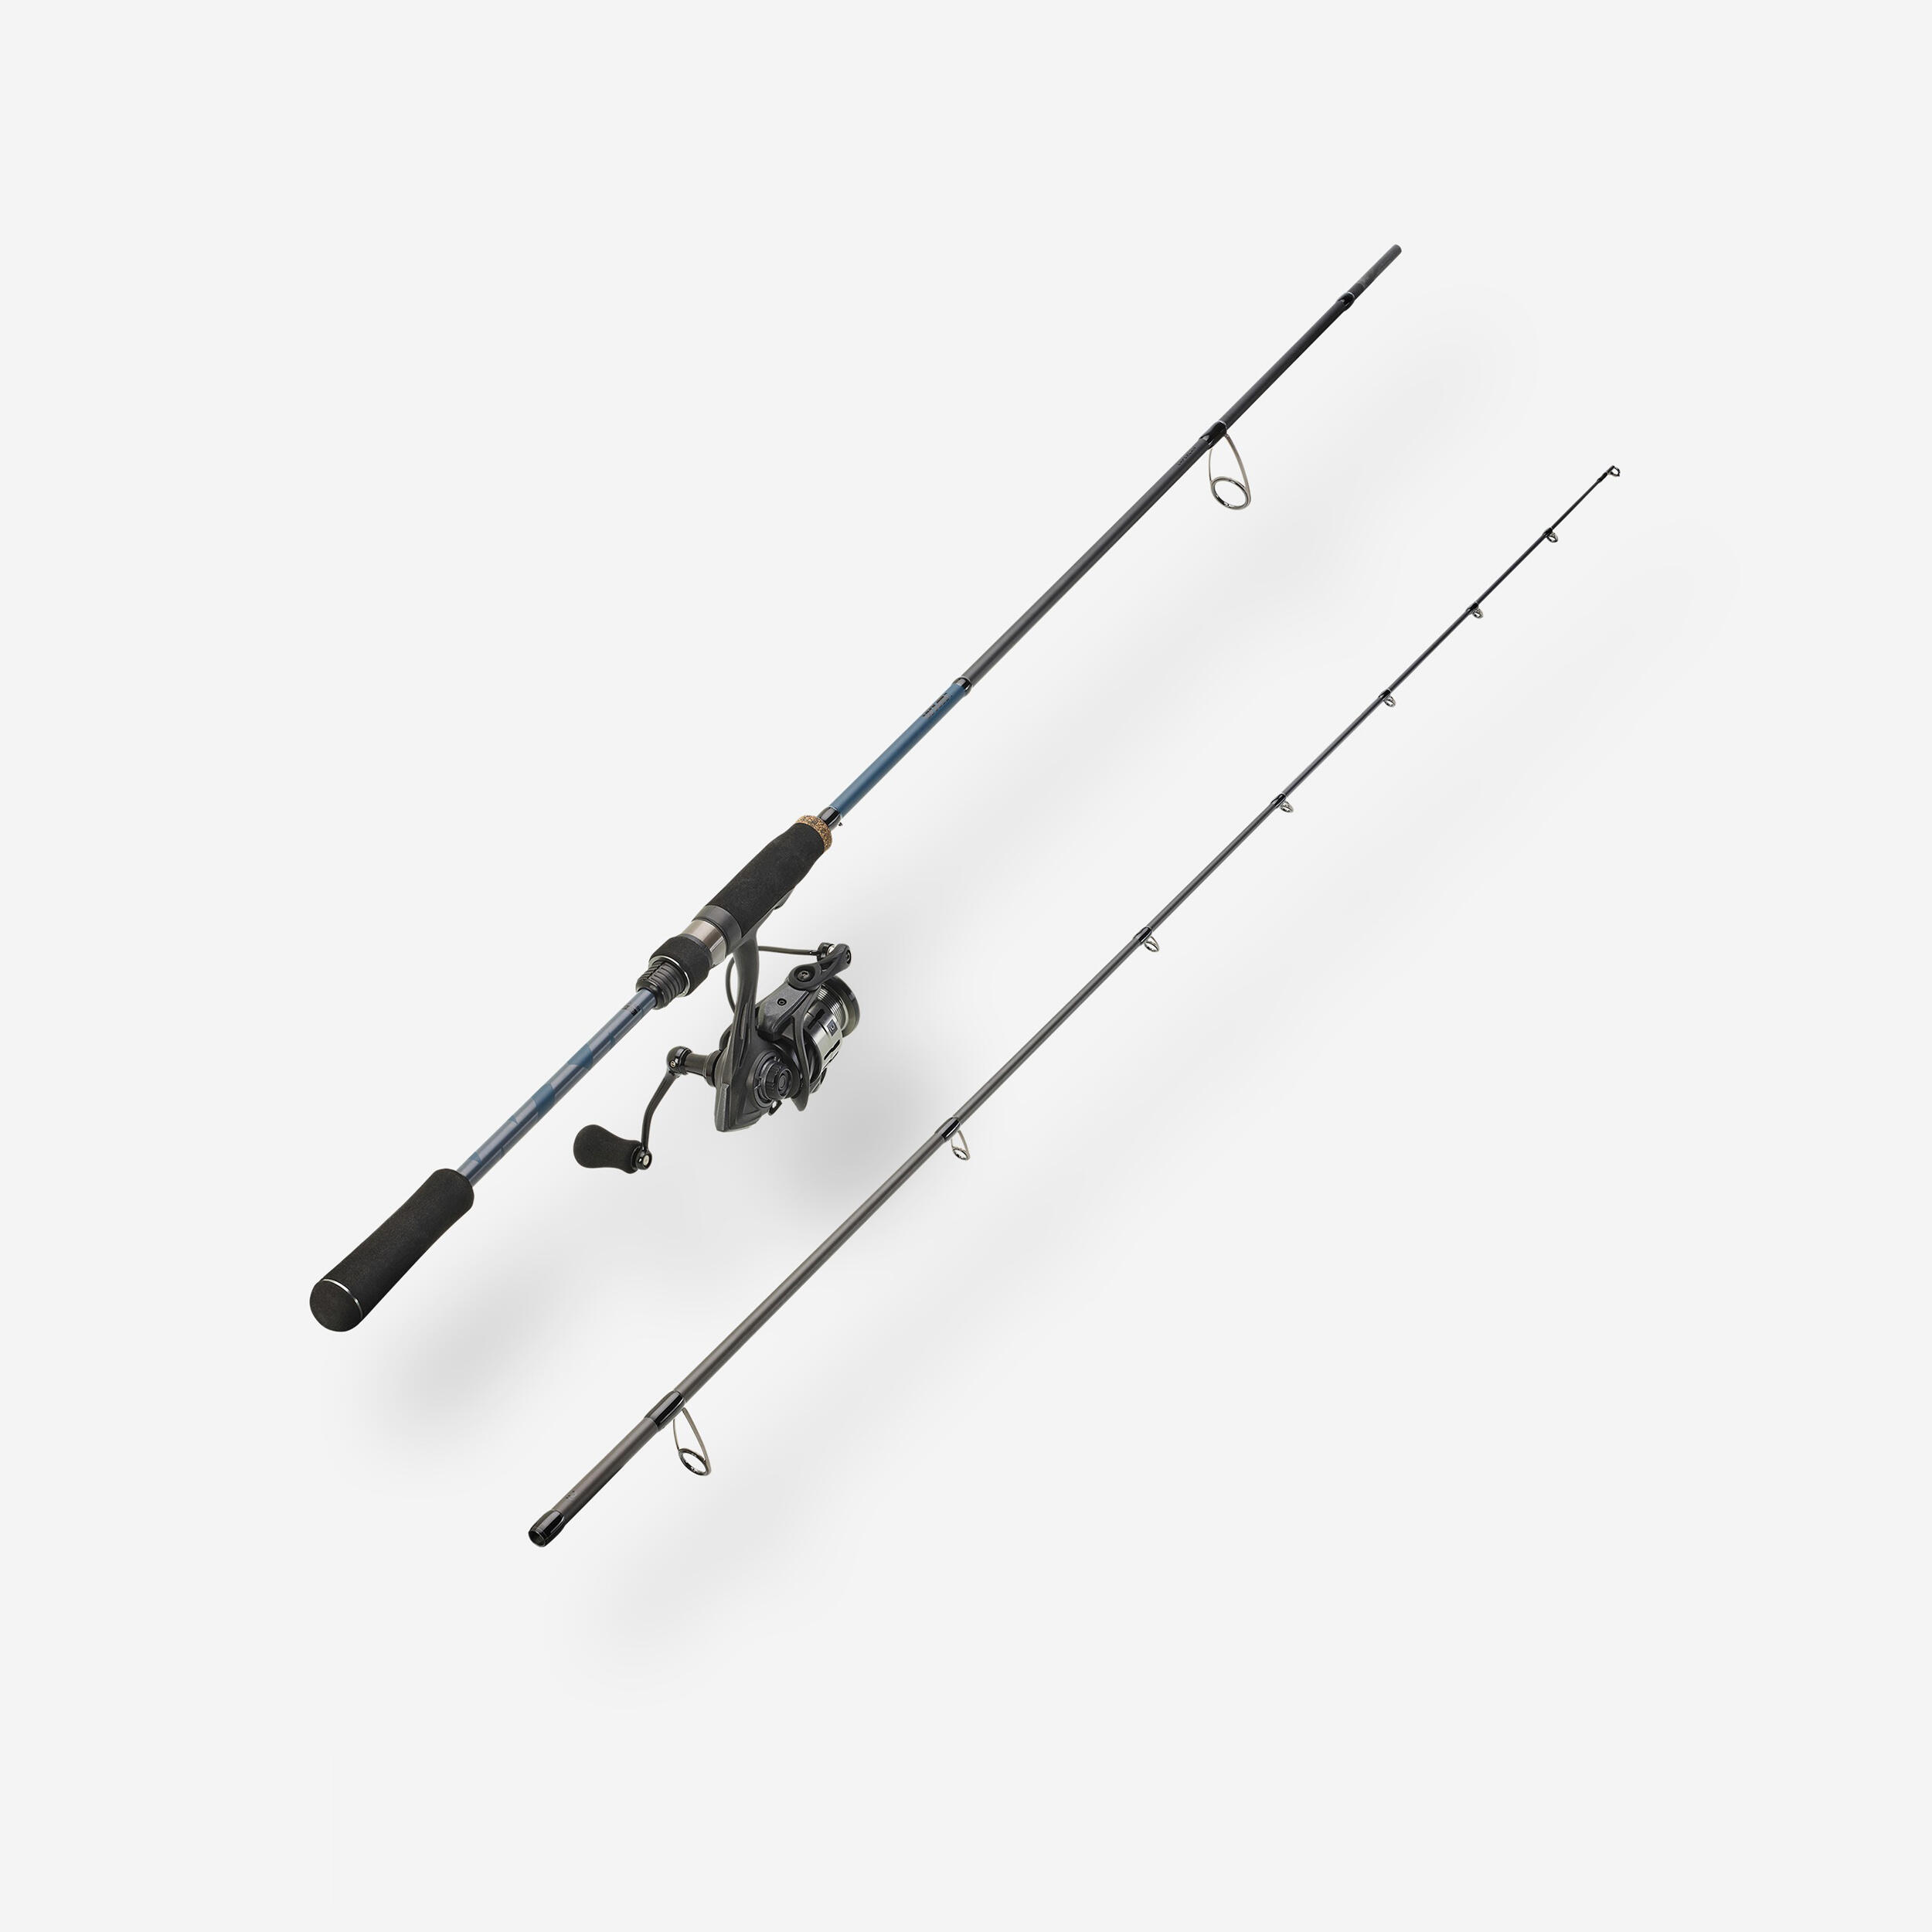 WXM-5 210 MH combo lure fishing rod and reel  - CAPERLAN